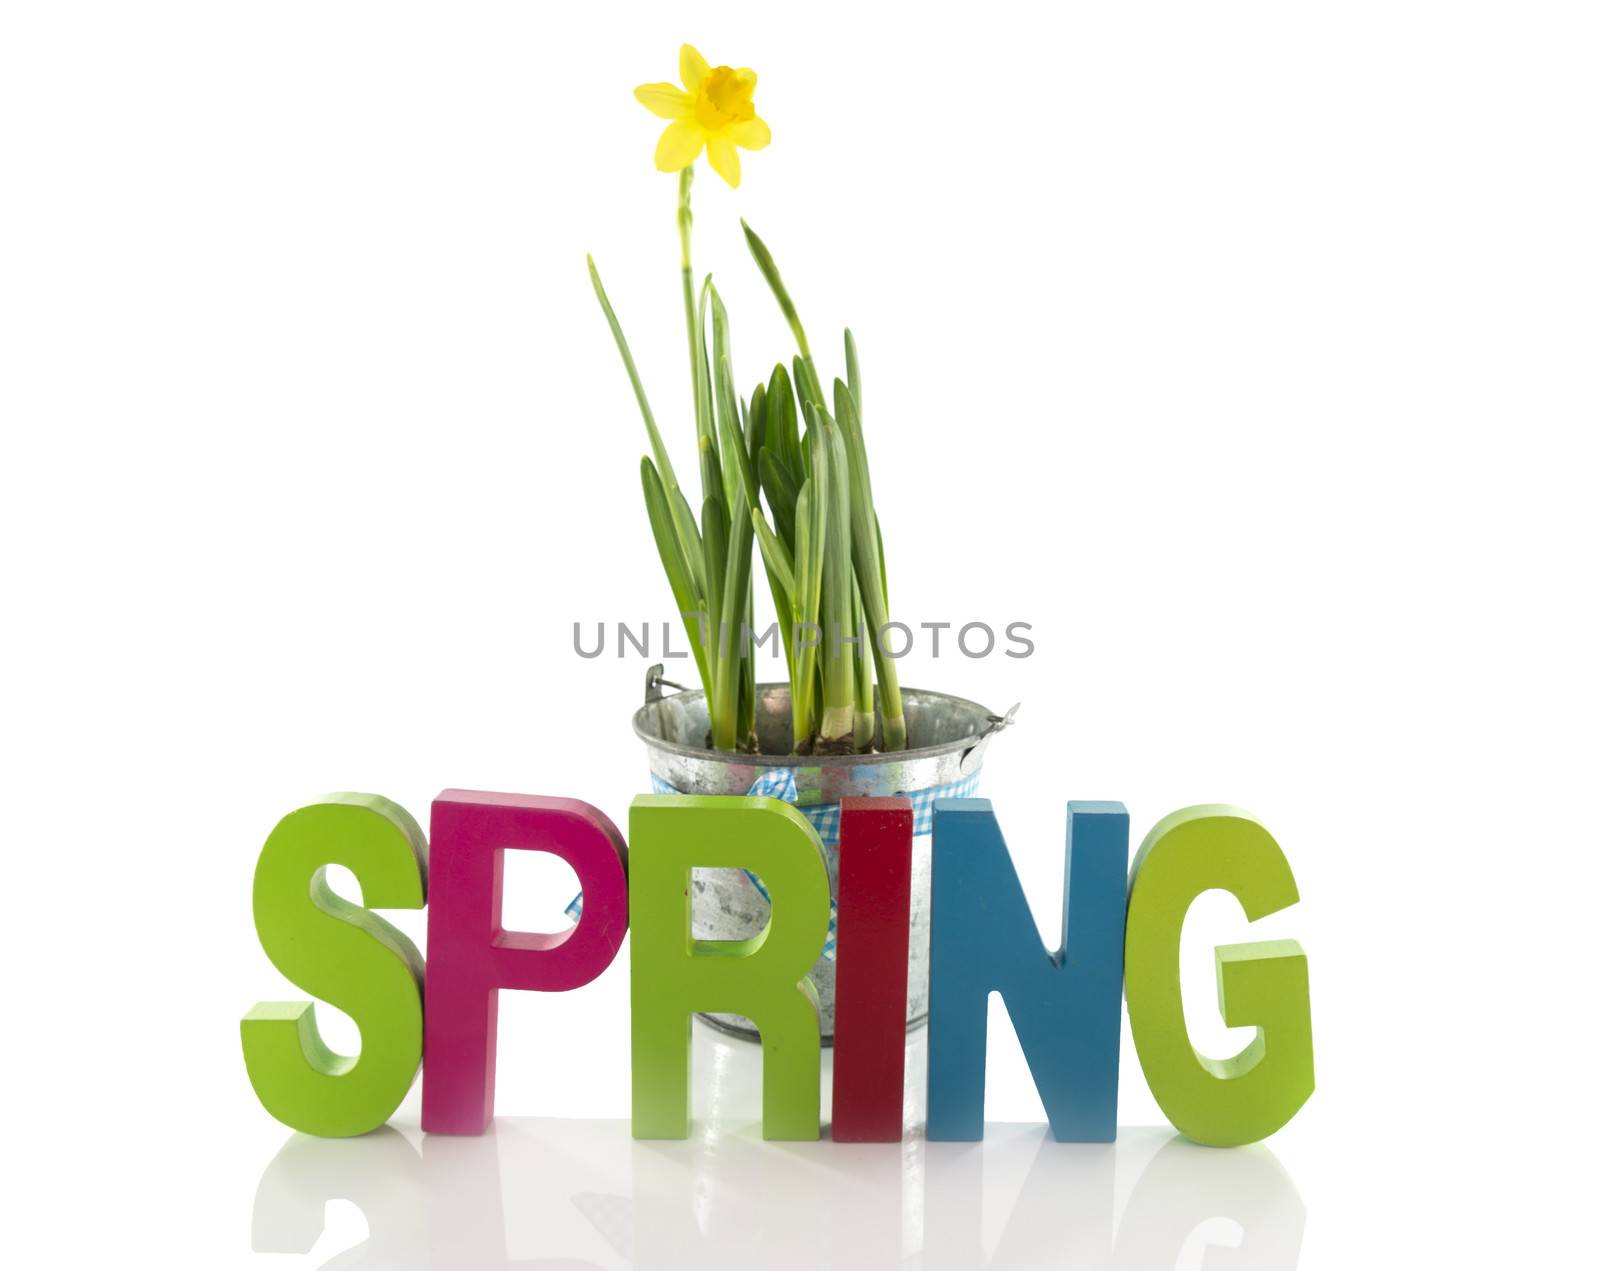 metal bucket with yellow narcissus flower an the text spring